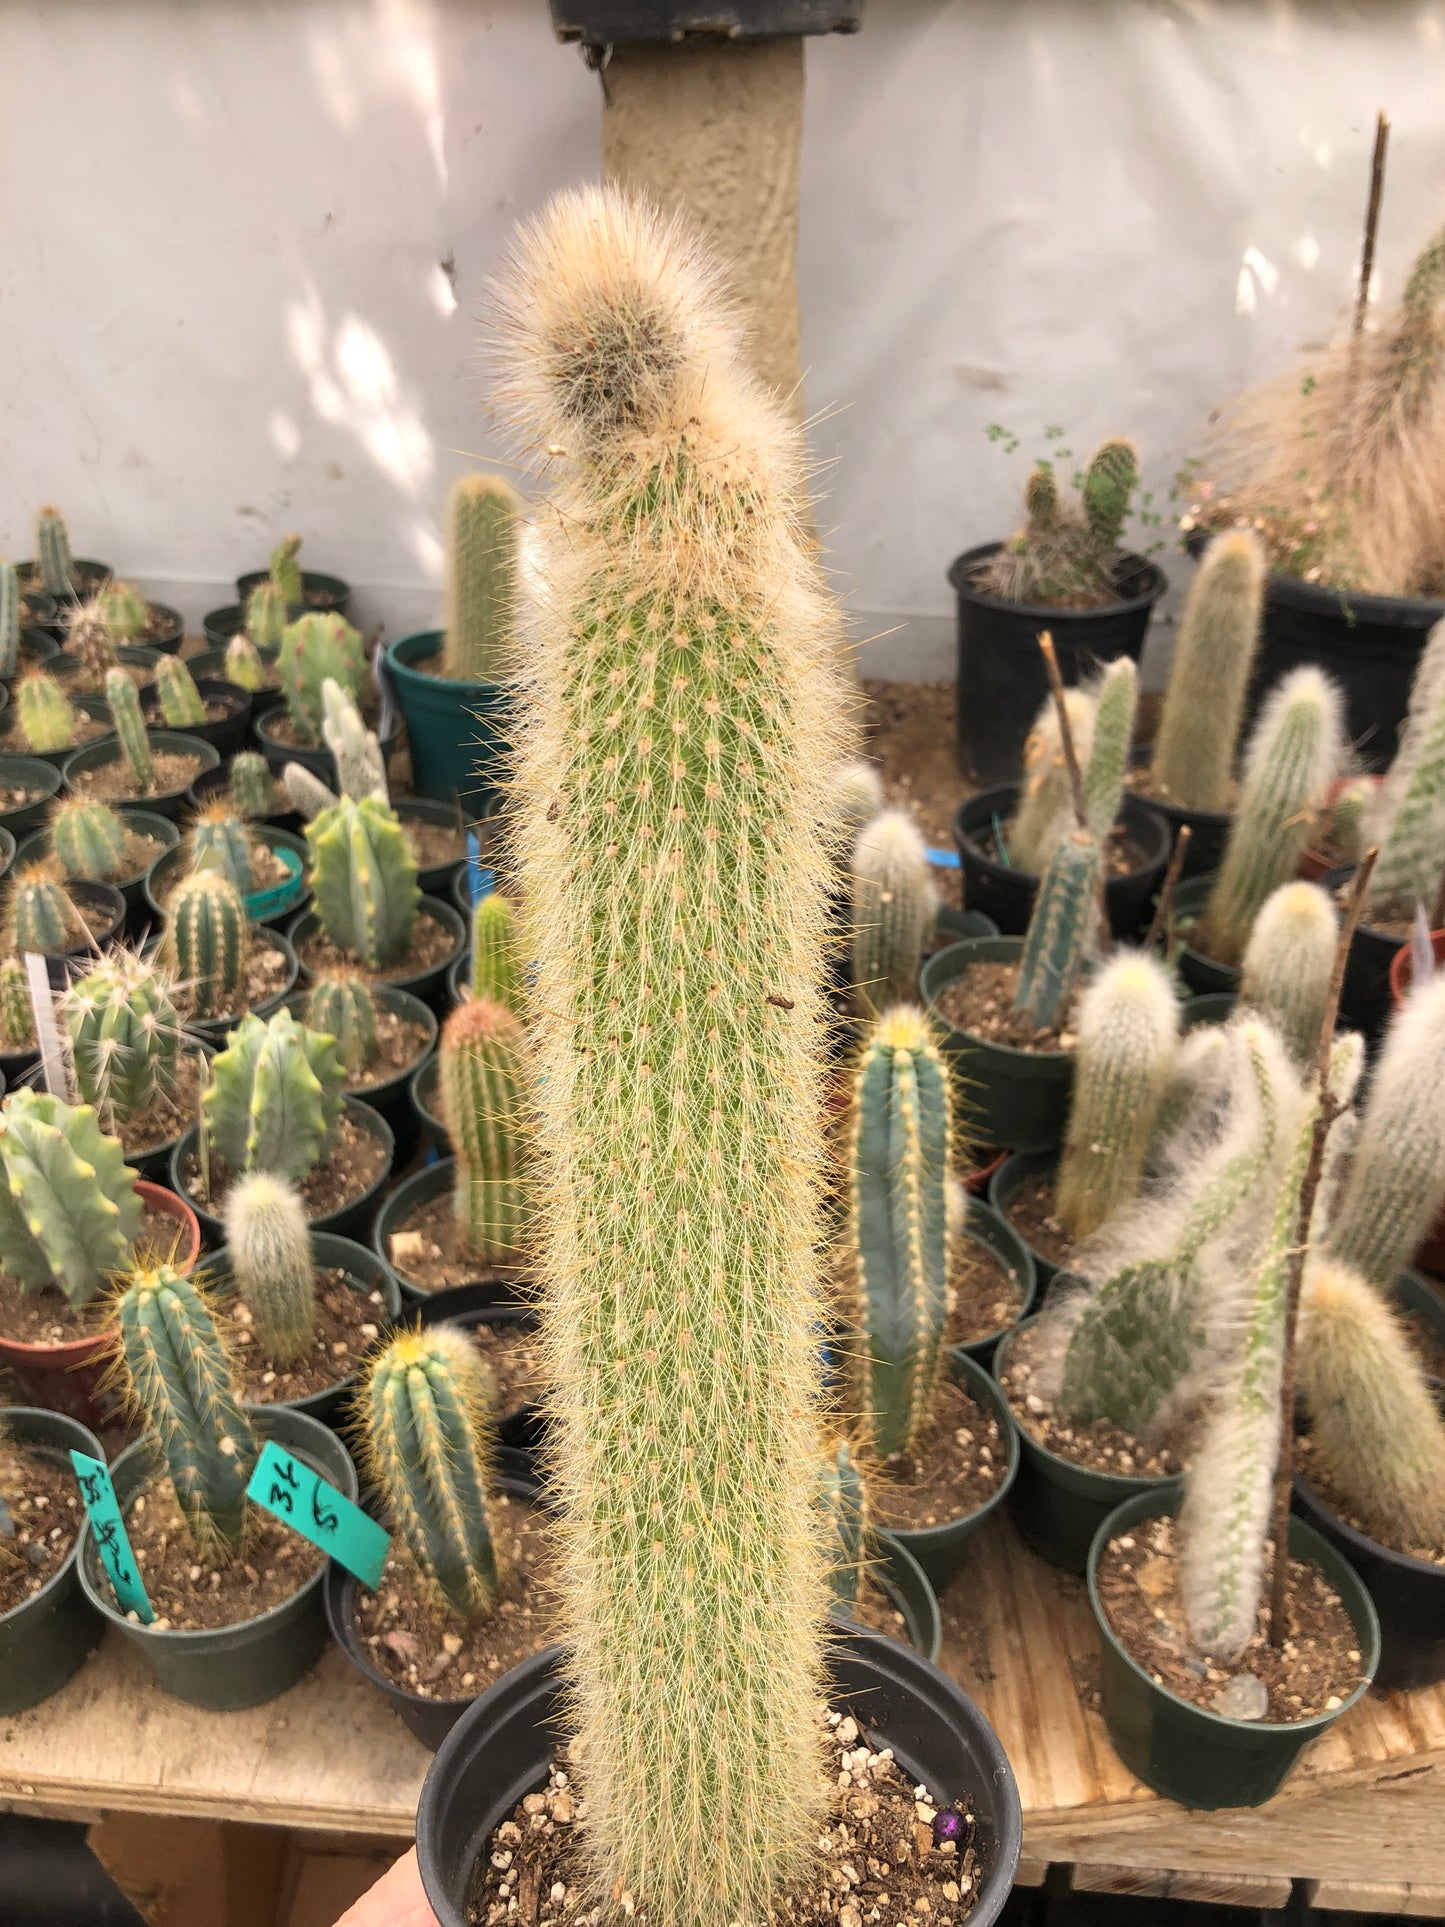 Cleistocactus Strausii Silver Torch Cactus 11”Tall #11W